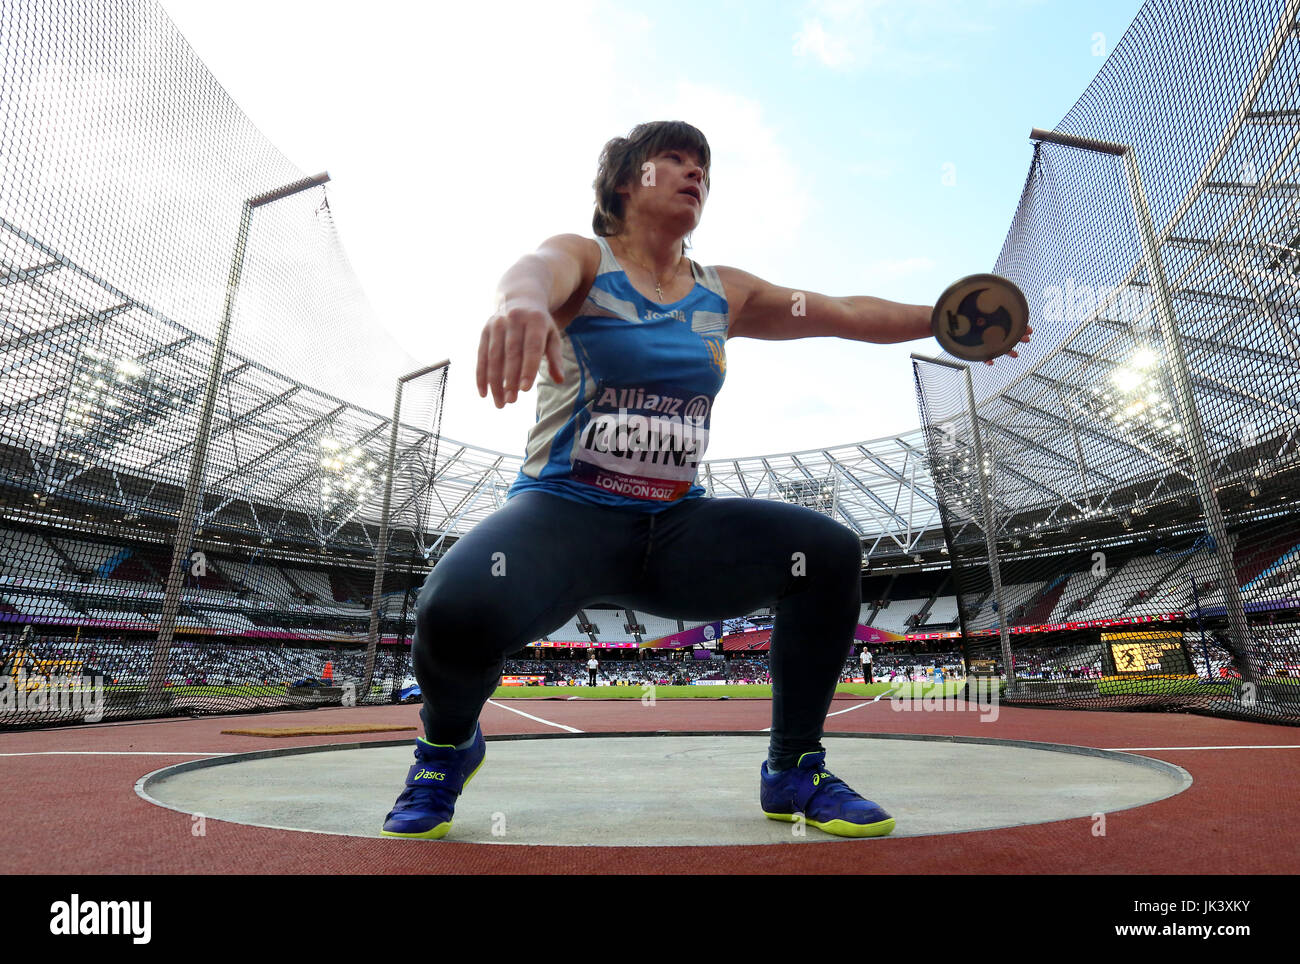 Ukraine's Orysia Ilchyna in action during the Women's Discus F12 Final during day eight of the 2017 World Para Athletics Championships at London Stadium. PRESS ASSOCIATION Photo. Picture date: Friday July 21, 2017. See PA story ATHLETICS Para. Photo credit should read: Simon Cooper/PA Wire. RESTRICTIONS: Editorial use only. No transmission of sound or moving images and no video simulation. Stock Photo